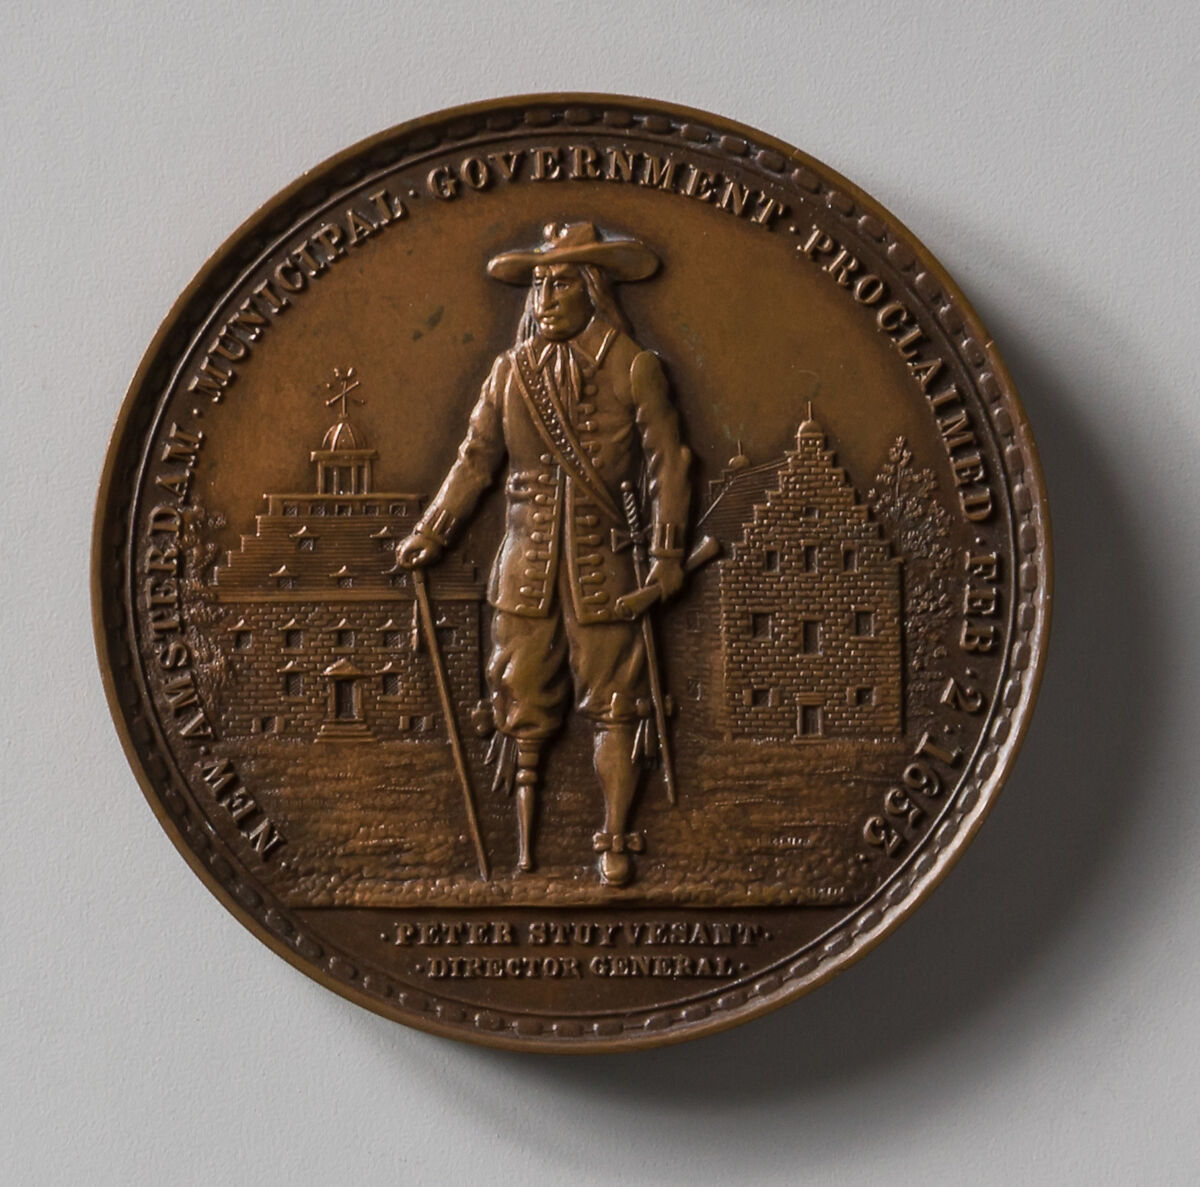 The 250th Anniversary of the Institution of Municipal Government in New York, Bronze, American 